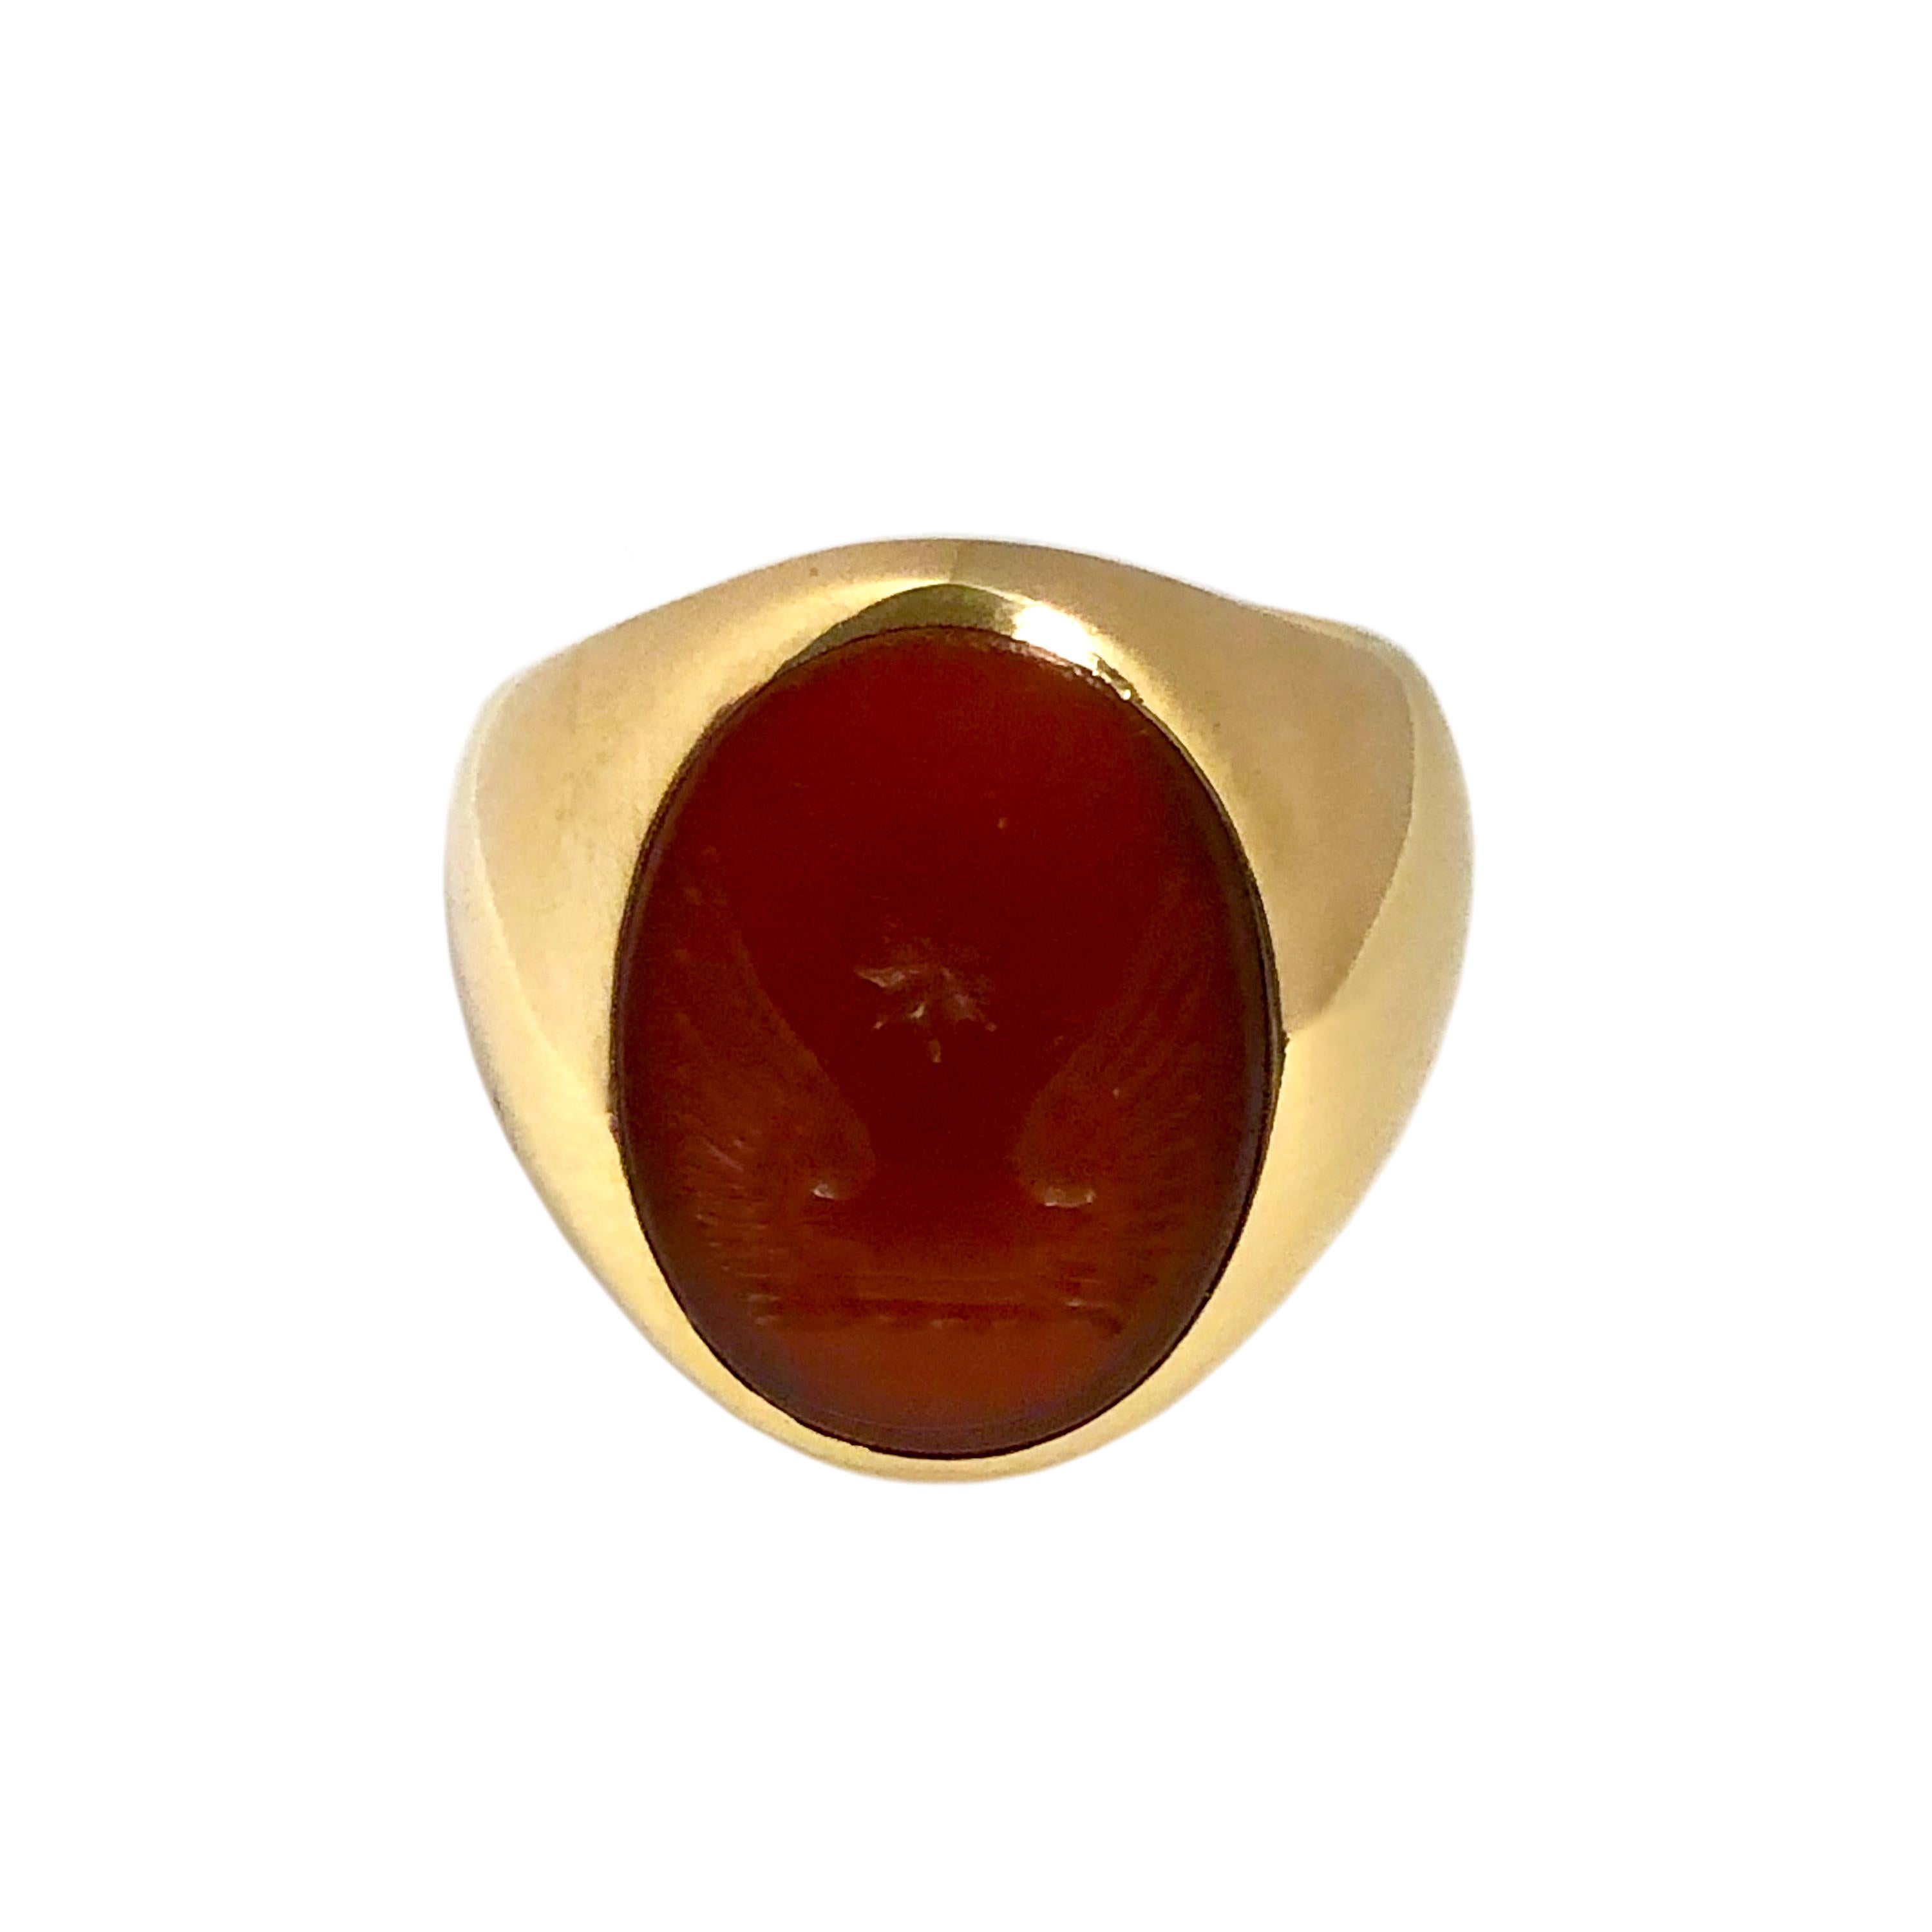 Circa 1910 14K yellow Gold Signet Ring, set with an oval Carnelian measuring 3/4 X 1/2 inch and is carved with a Double wings and Star Signet. The ring is solid with a good weight of 15.4 Grams. Finger size 7 1/4